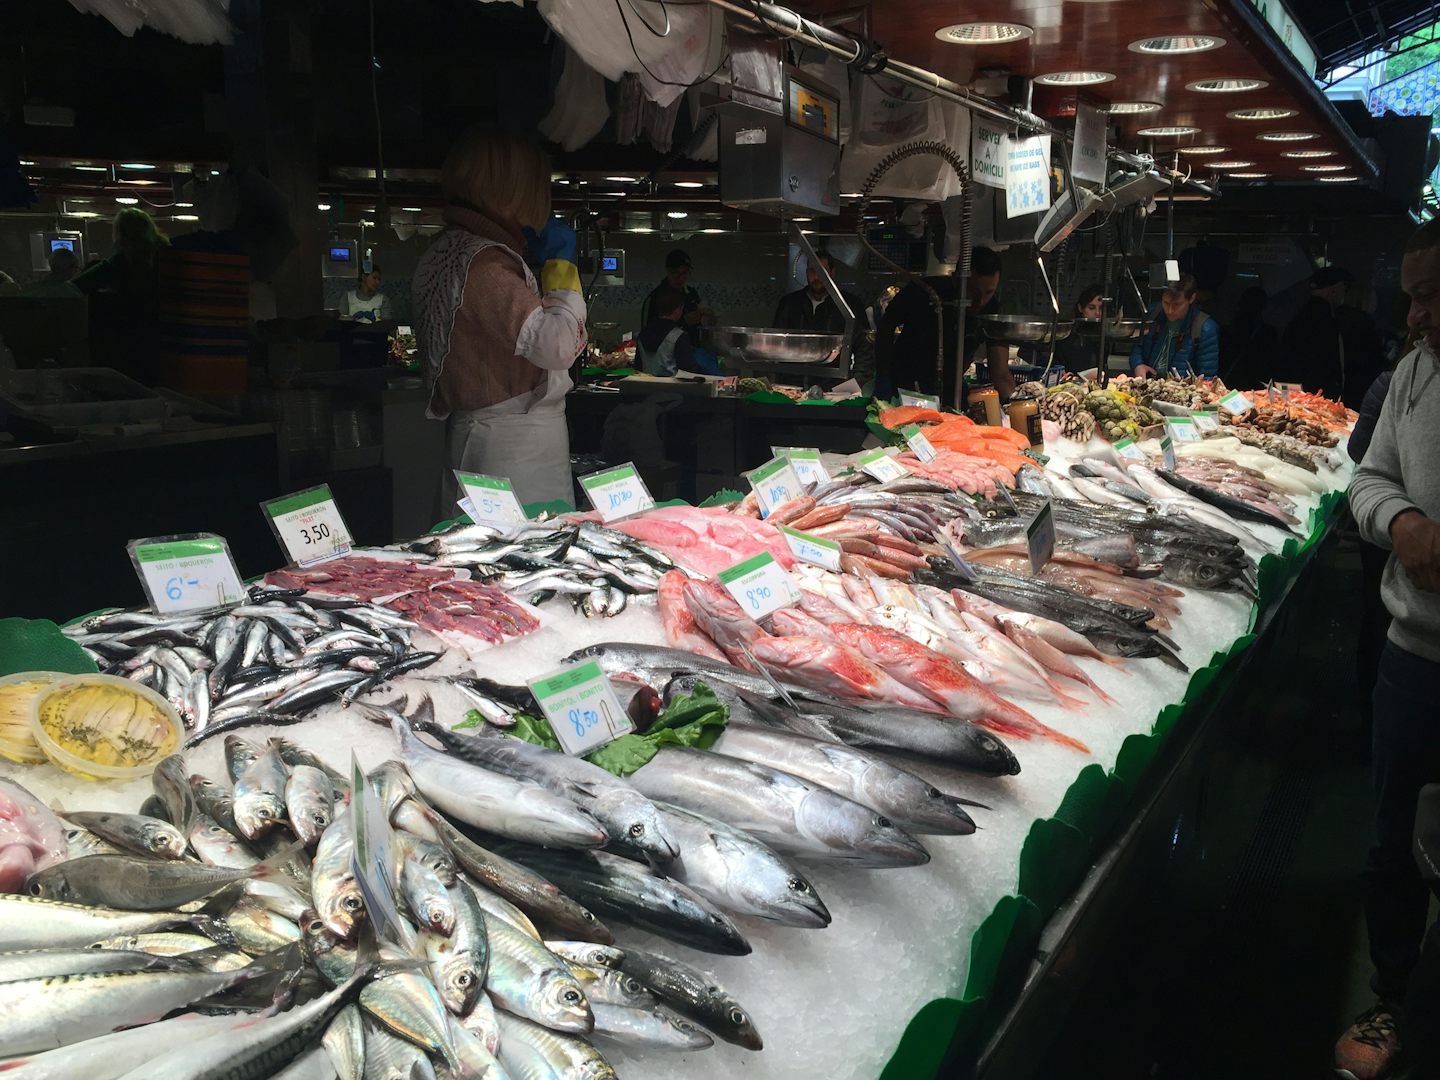 Barcelona has the most amazing markets!  It